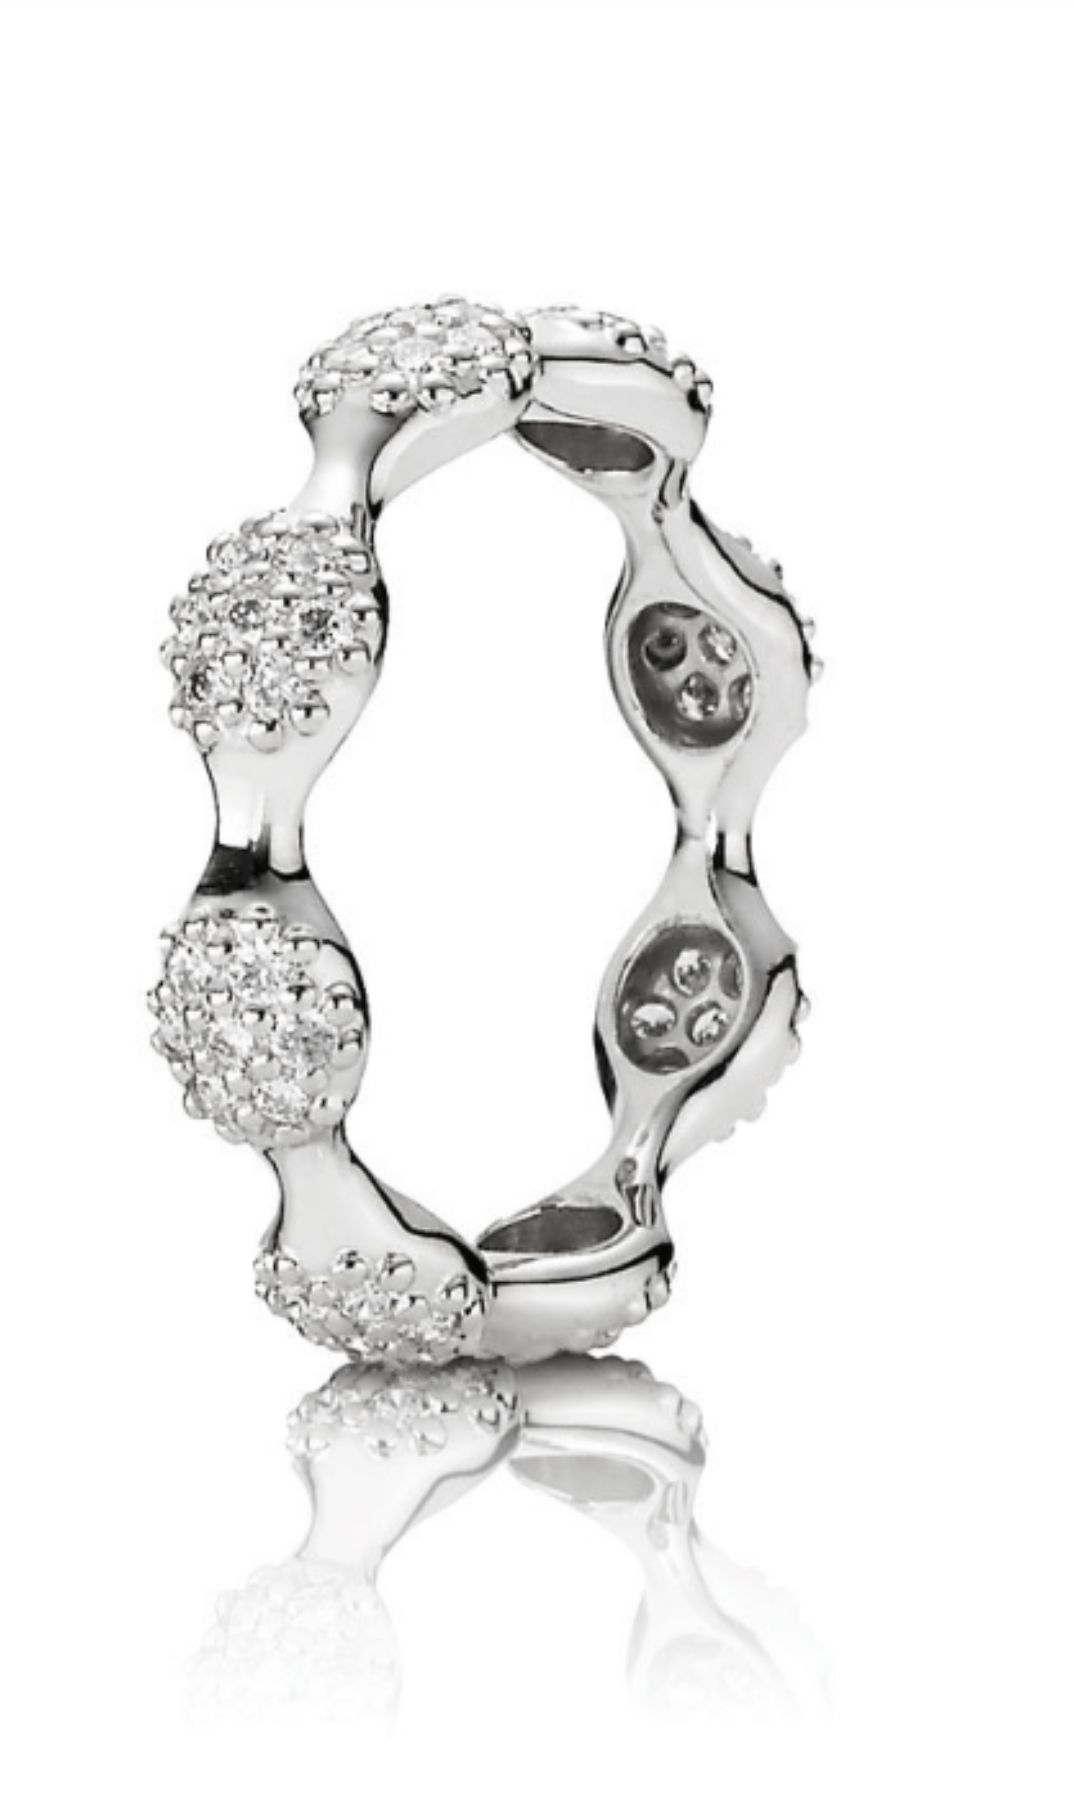 Pandora Love Pods Ring , 8 Pods  (View 10 of 25)